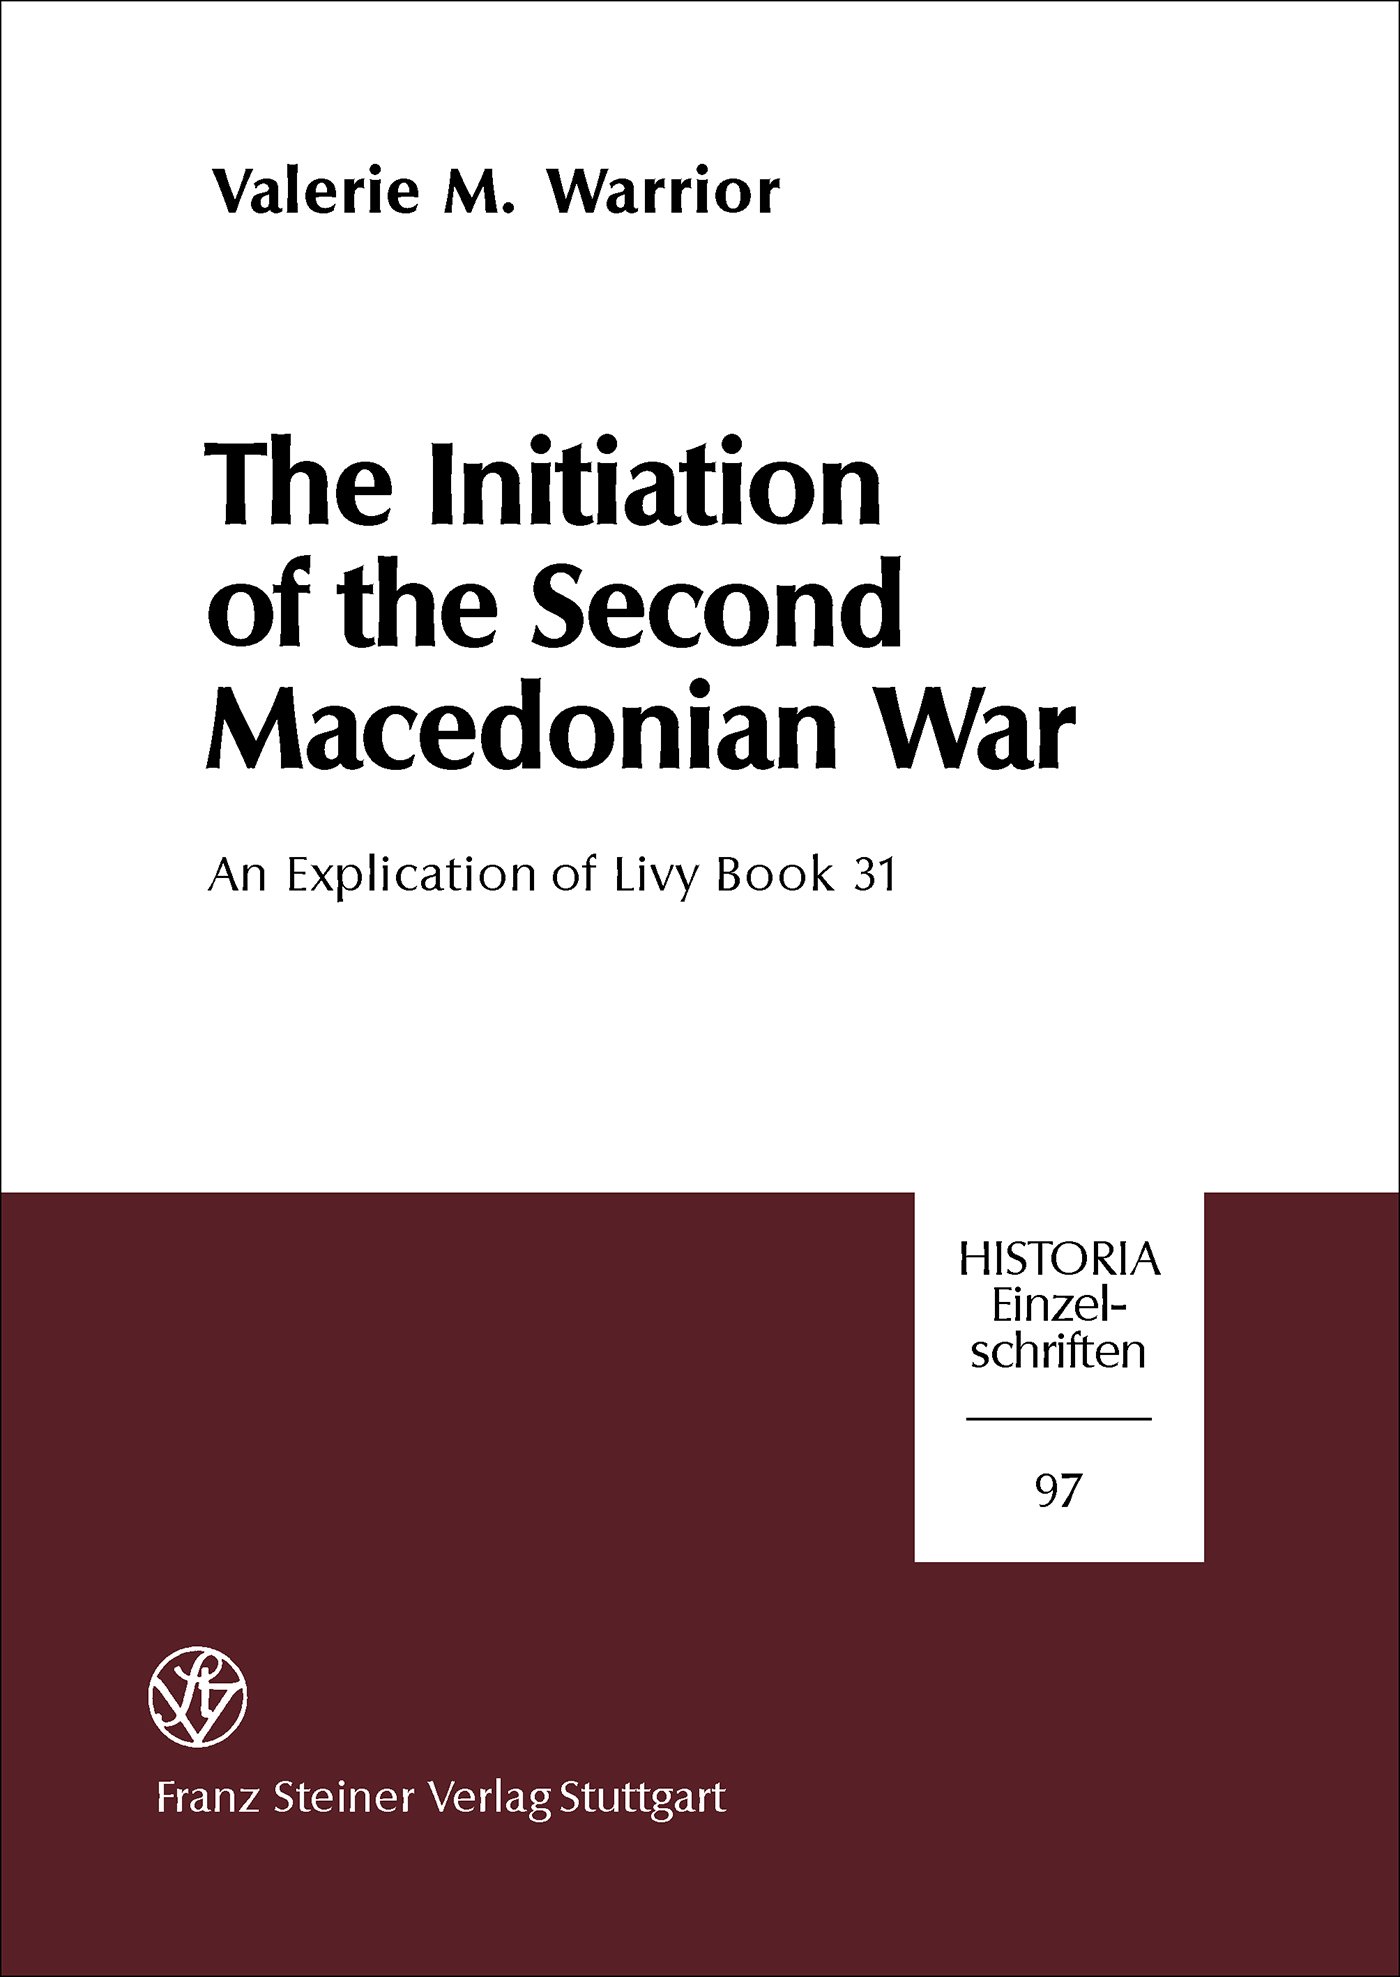 The Initiation of the Second Macedonian War